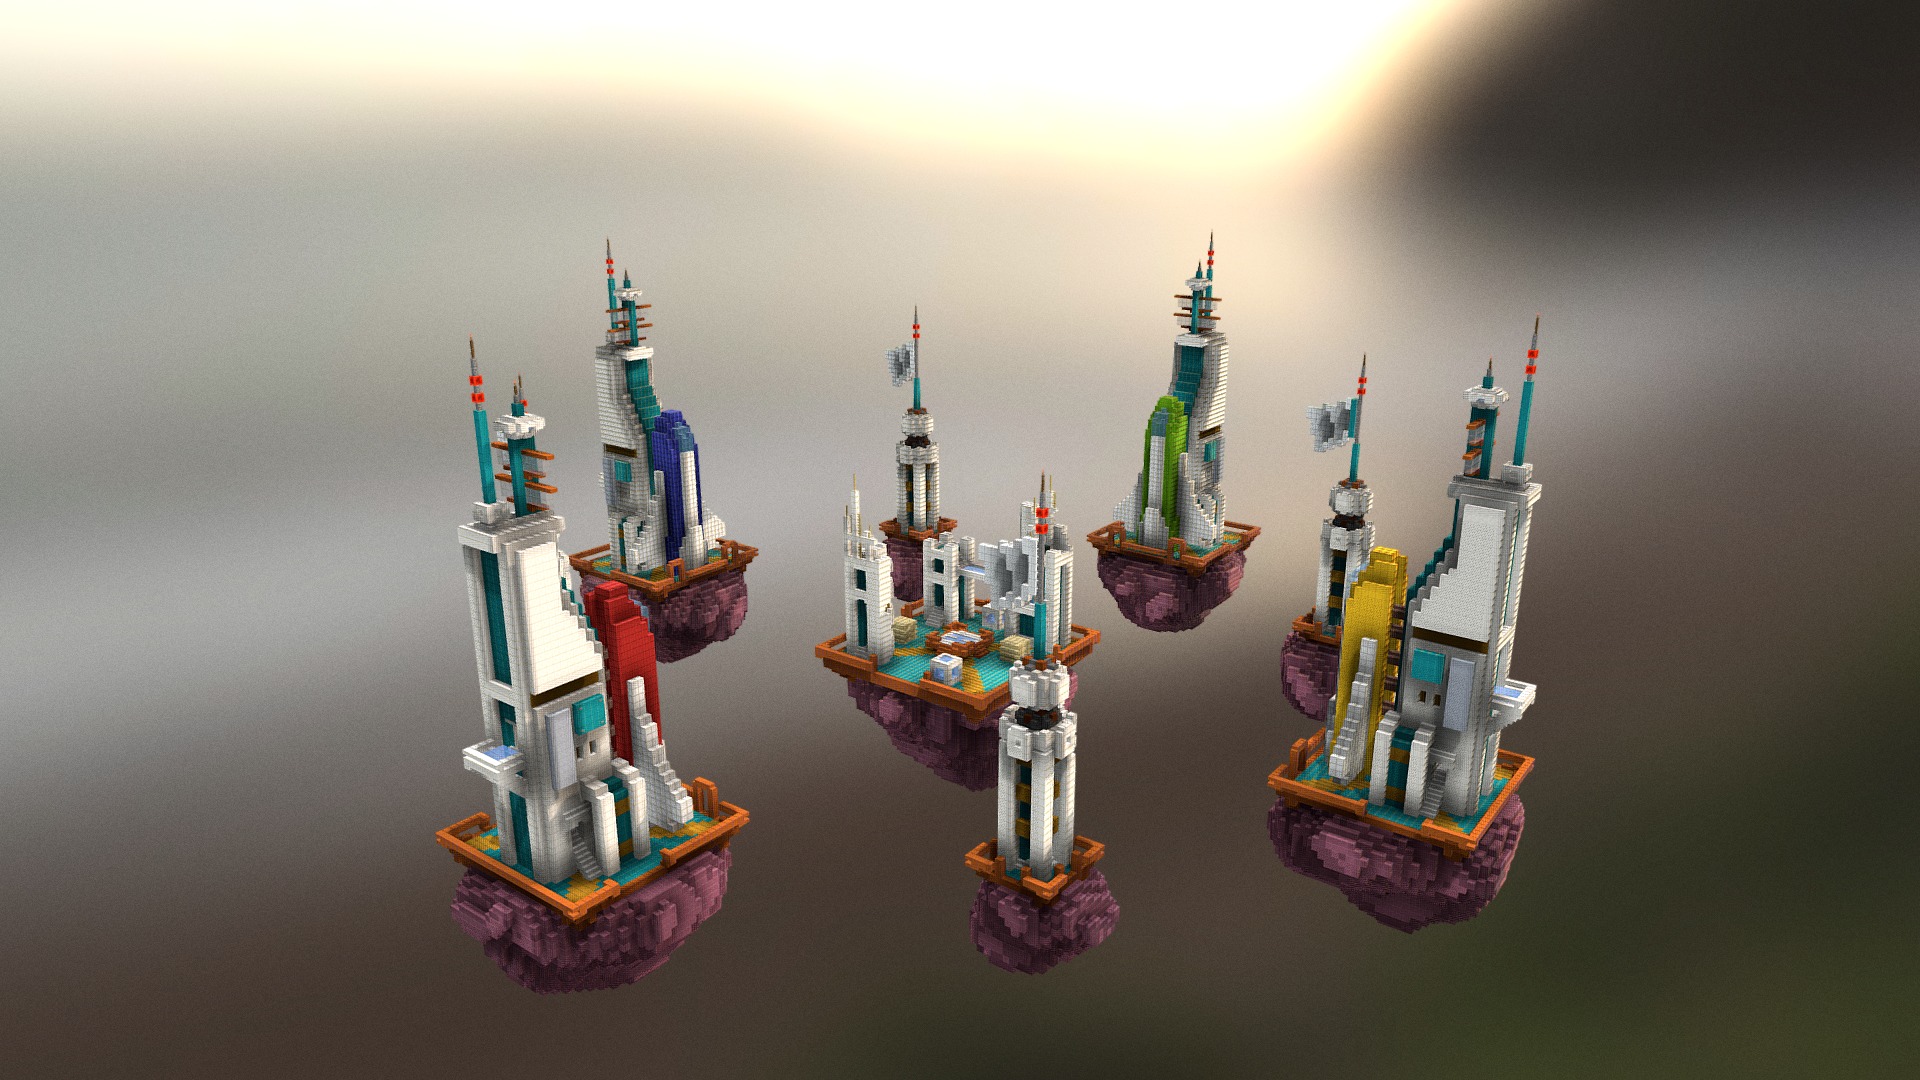 3D model SFi4x4bedwars - This is a 3D model of the SFi4x4bedwars. The 3D model is about a group of small boats in the water.